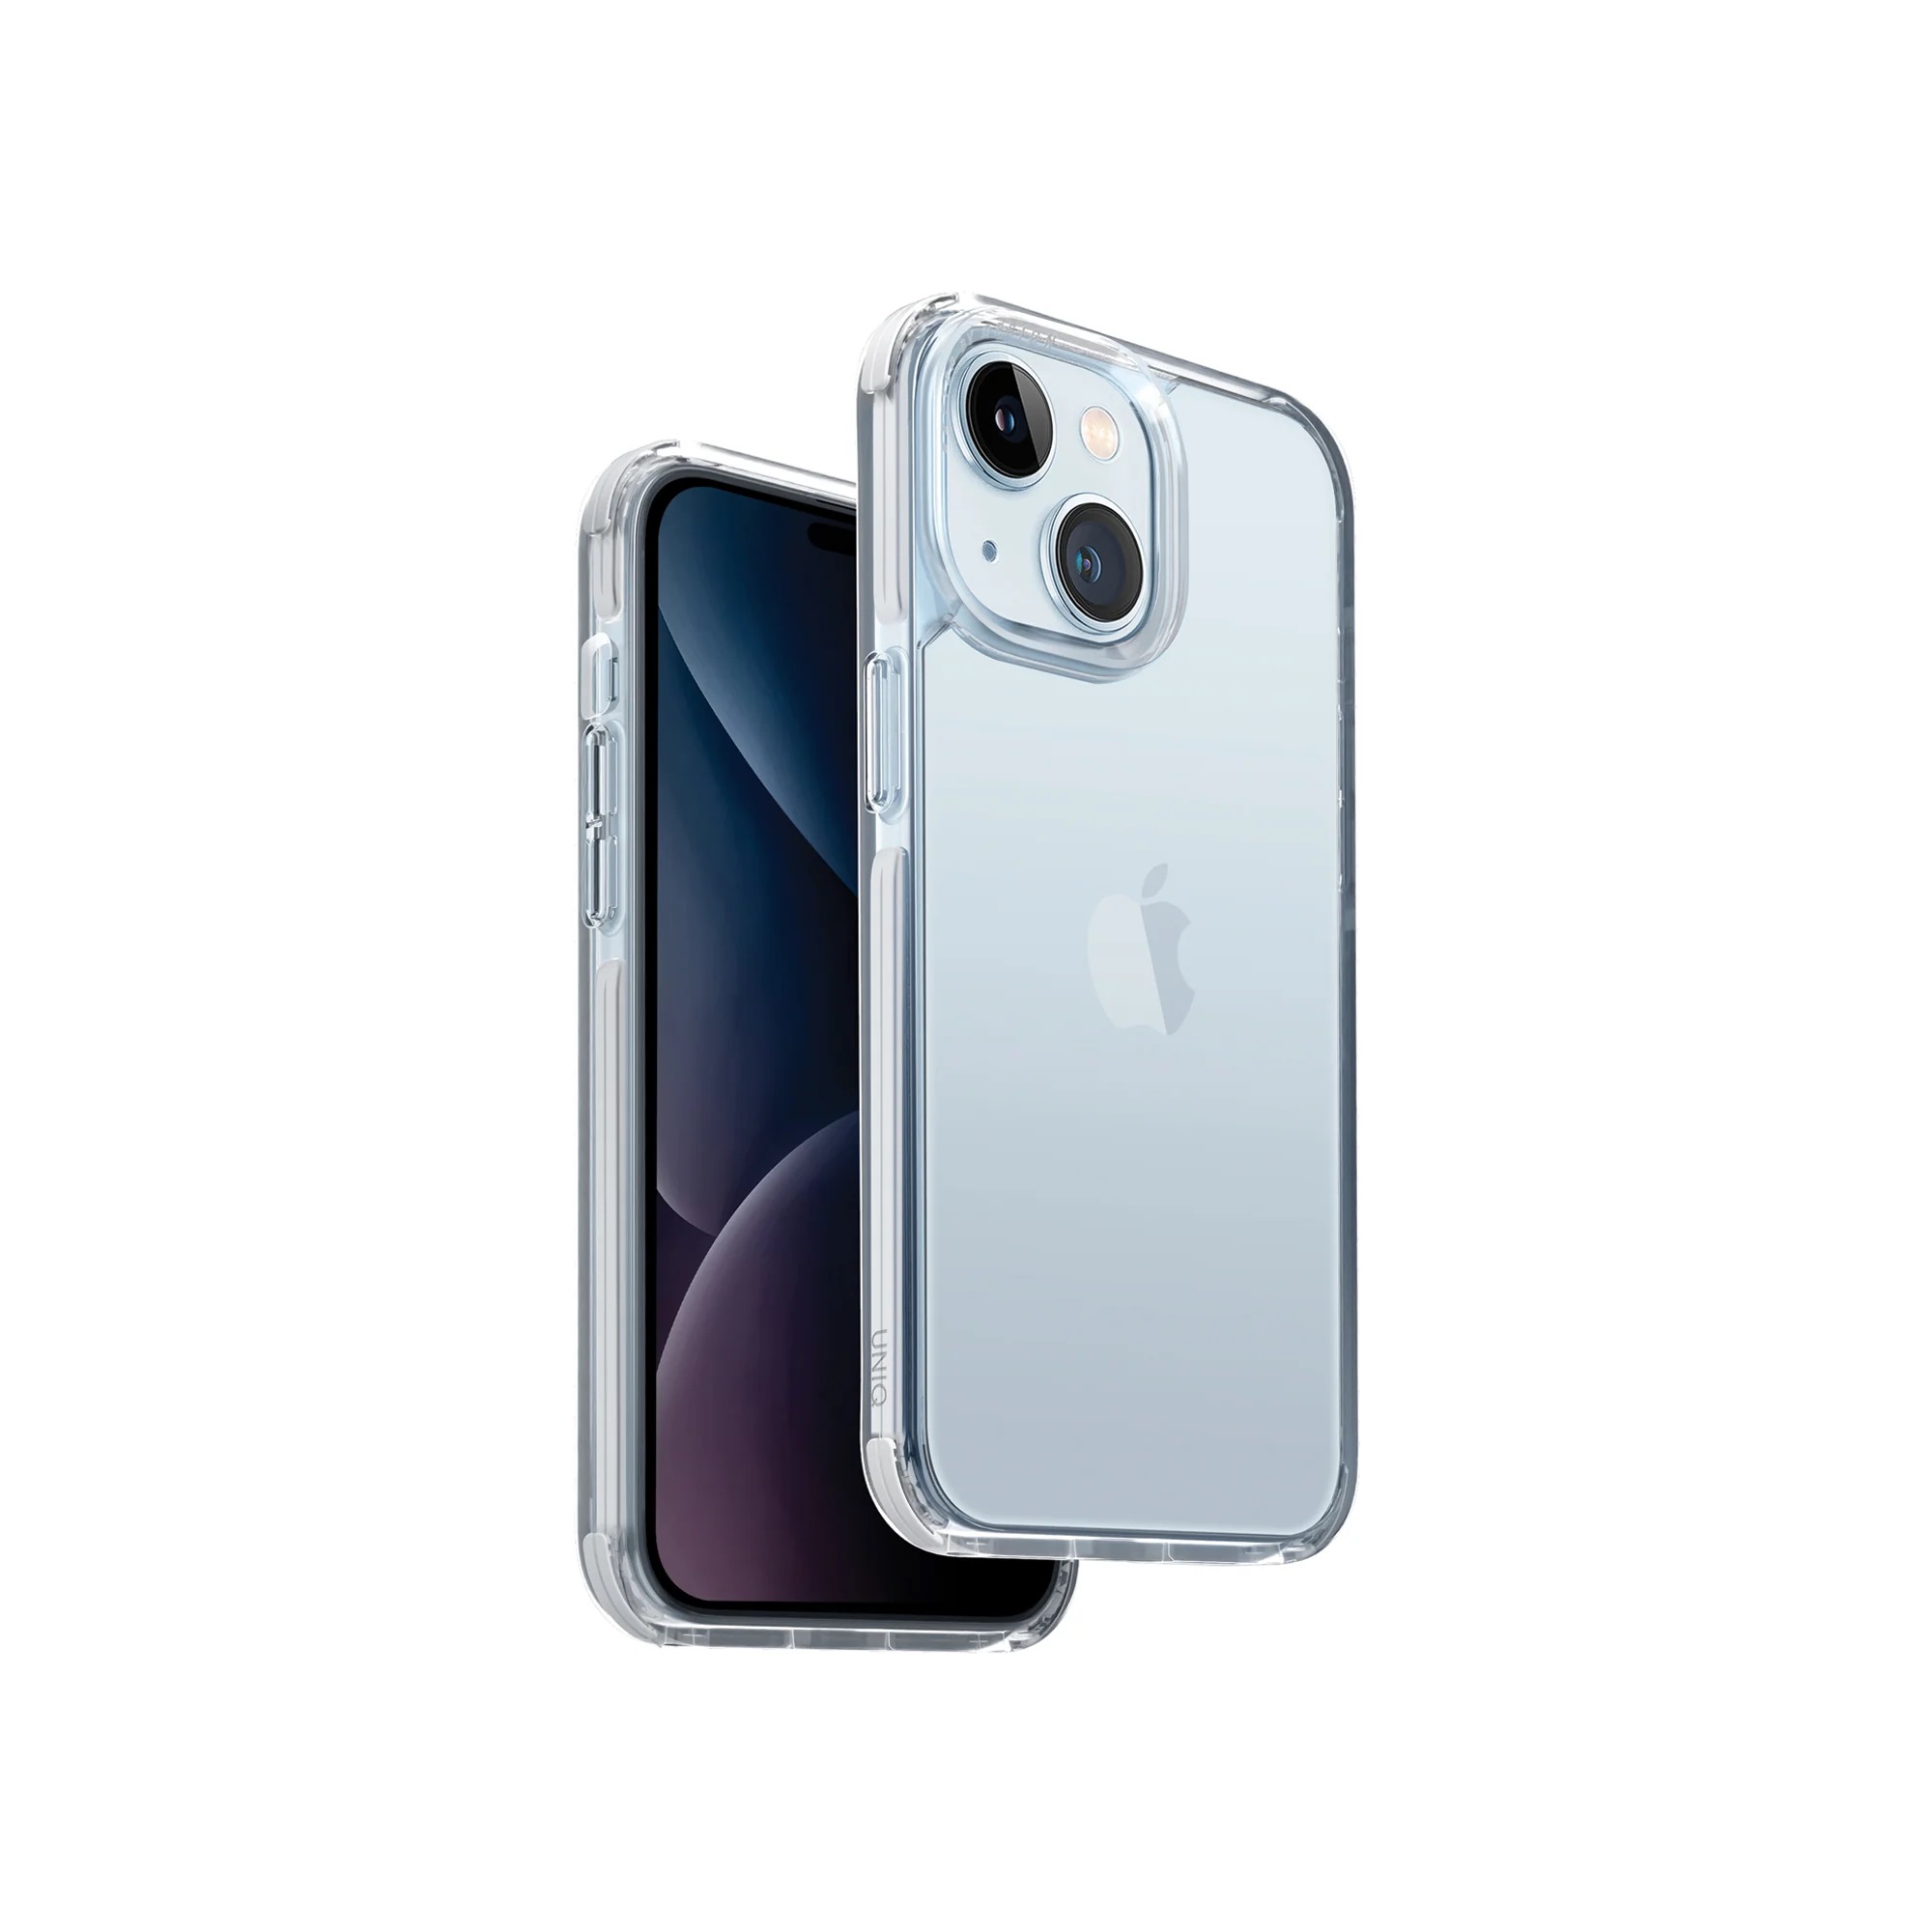 Picture of Uniq Combat Hybrid Ultra Tough Drop Protection Case for iPhone 15 6.1 (Blanc White) Apple iPhone 15 6.1- Apple iPhone 15 6.1 Cases, Apple iPhone 15 6.1 Covers, iPad Cases and a wide selection of Apple iPhone 15 6.1 Accessories in Malaysia, Sabah, Sarawak and Singapore 